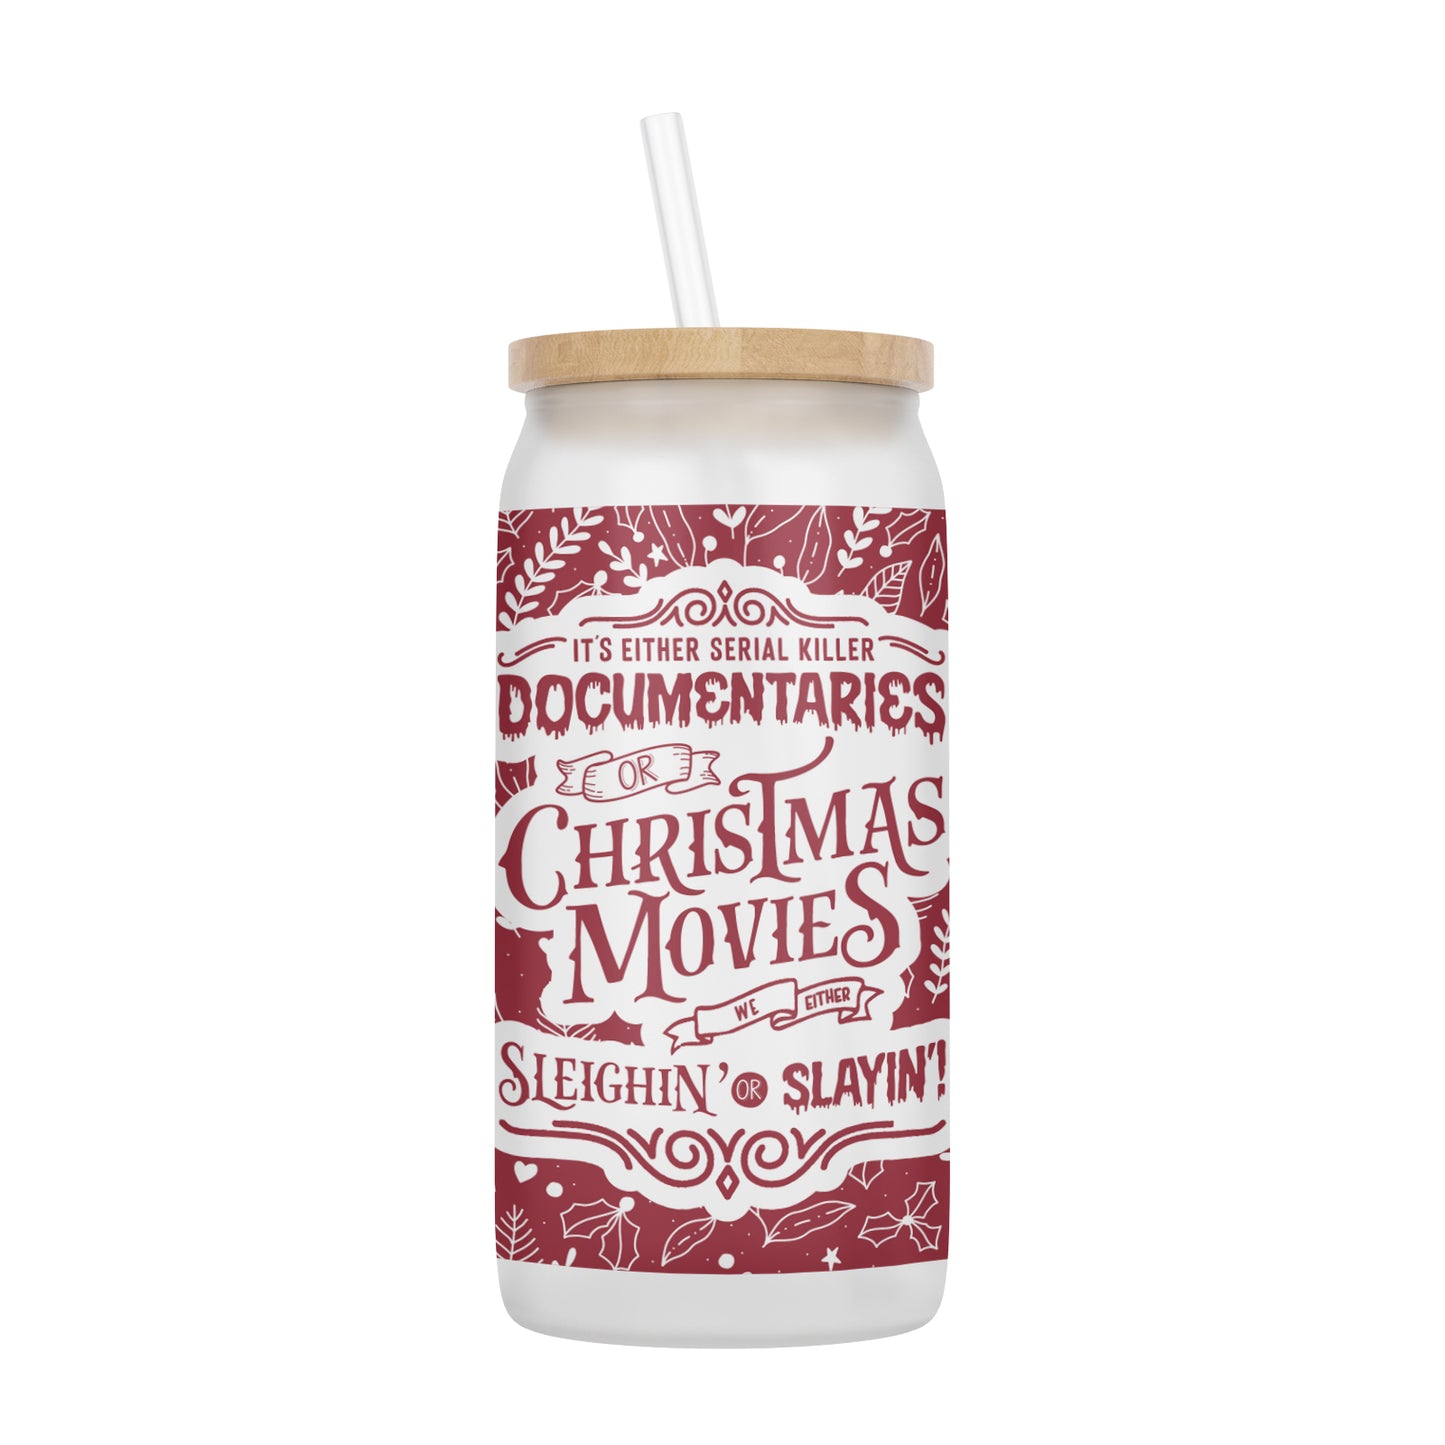 Serial Killer Documentaries or Christmas Movies, We're Either Sleighin' or Slayin' 16 oz Glass Jar With Lid